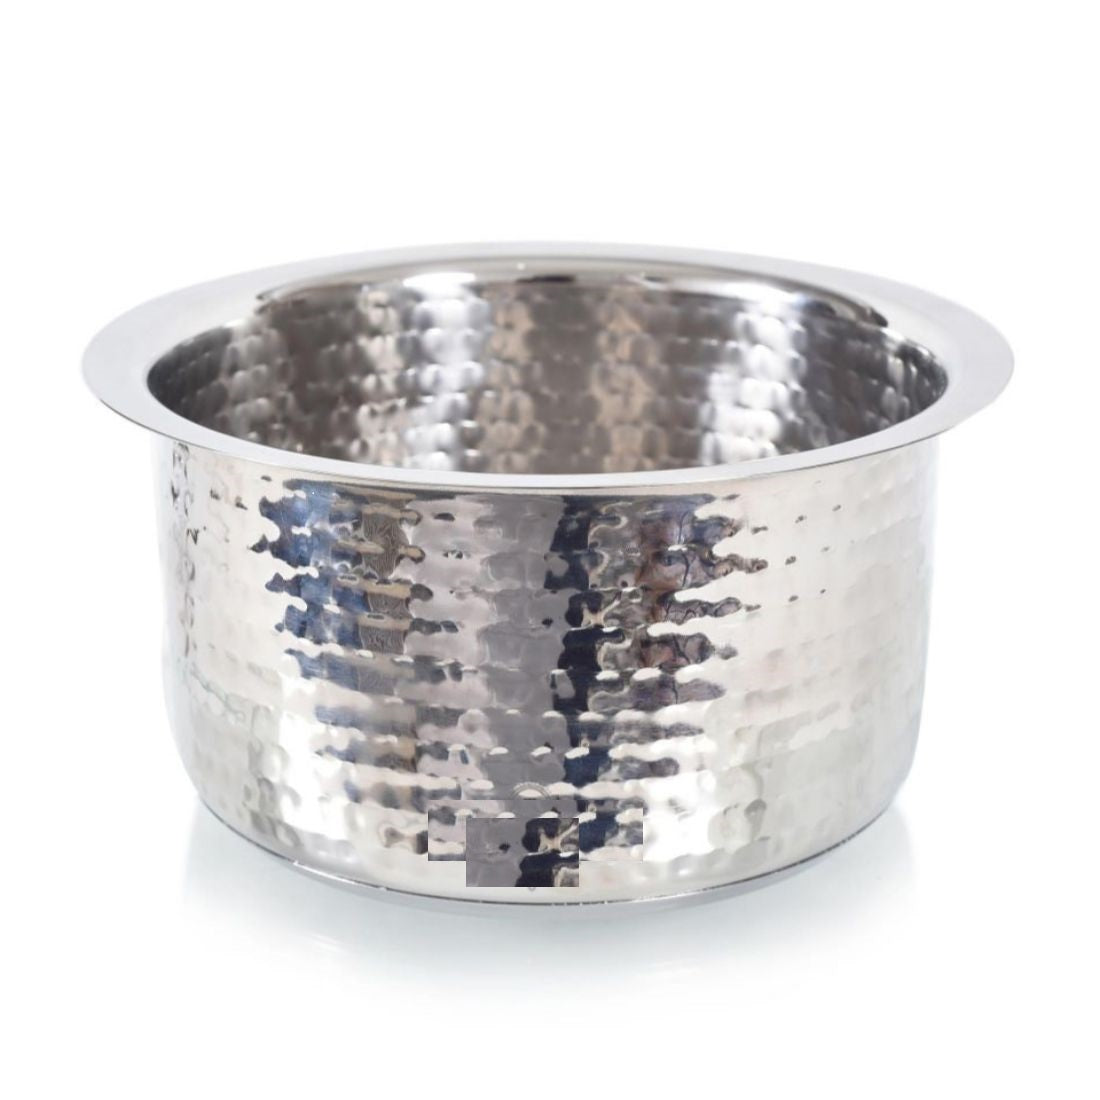 Aluminium Indian Hammered Deep Pot 19.7L with Lid No27 Round Heavy Duty 6228